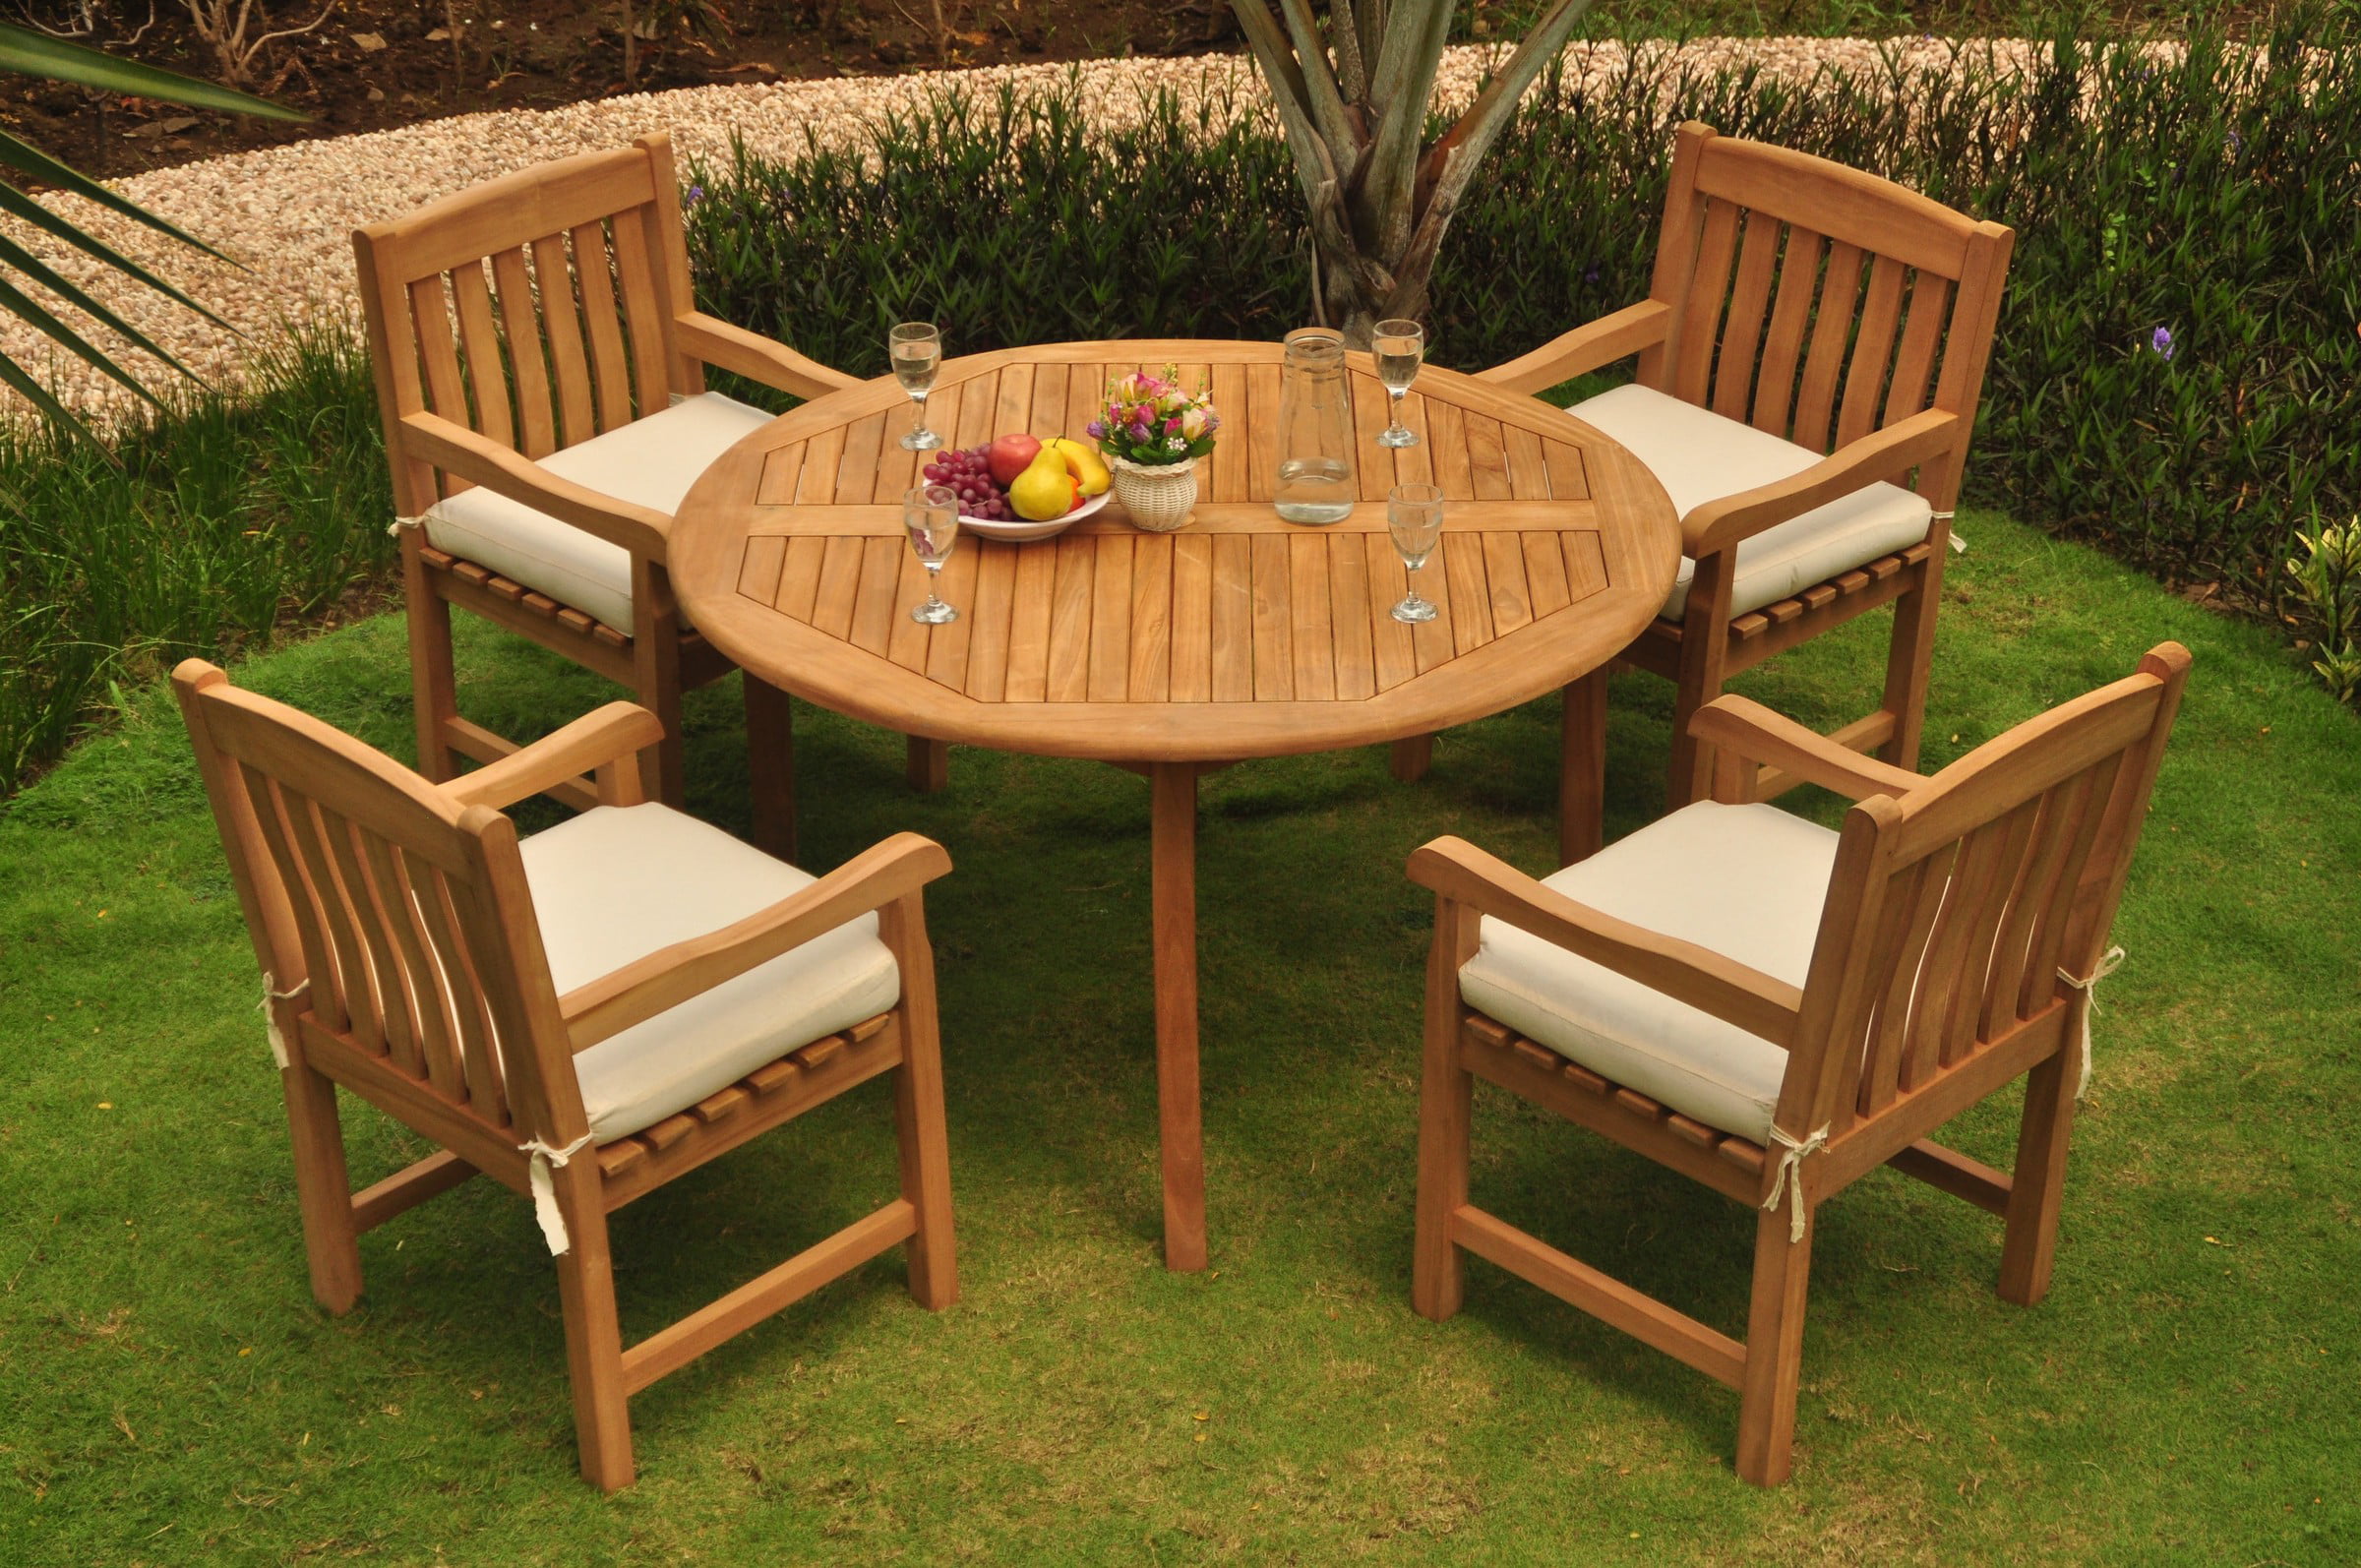 Why Teak Is The Best Wood For Outdoor Furniture